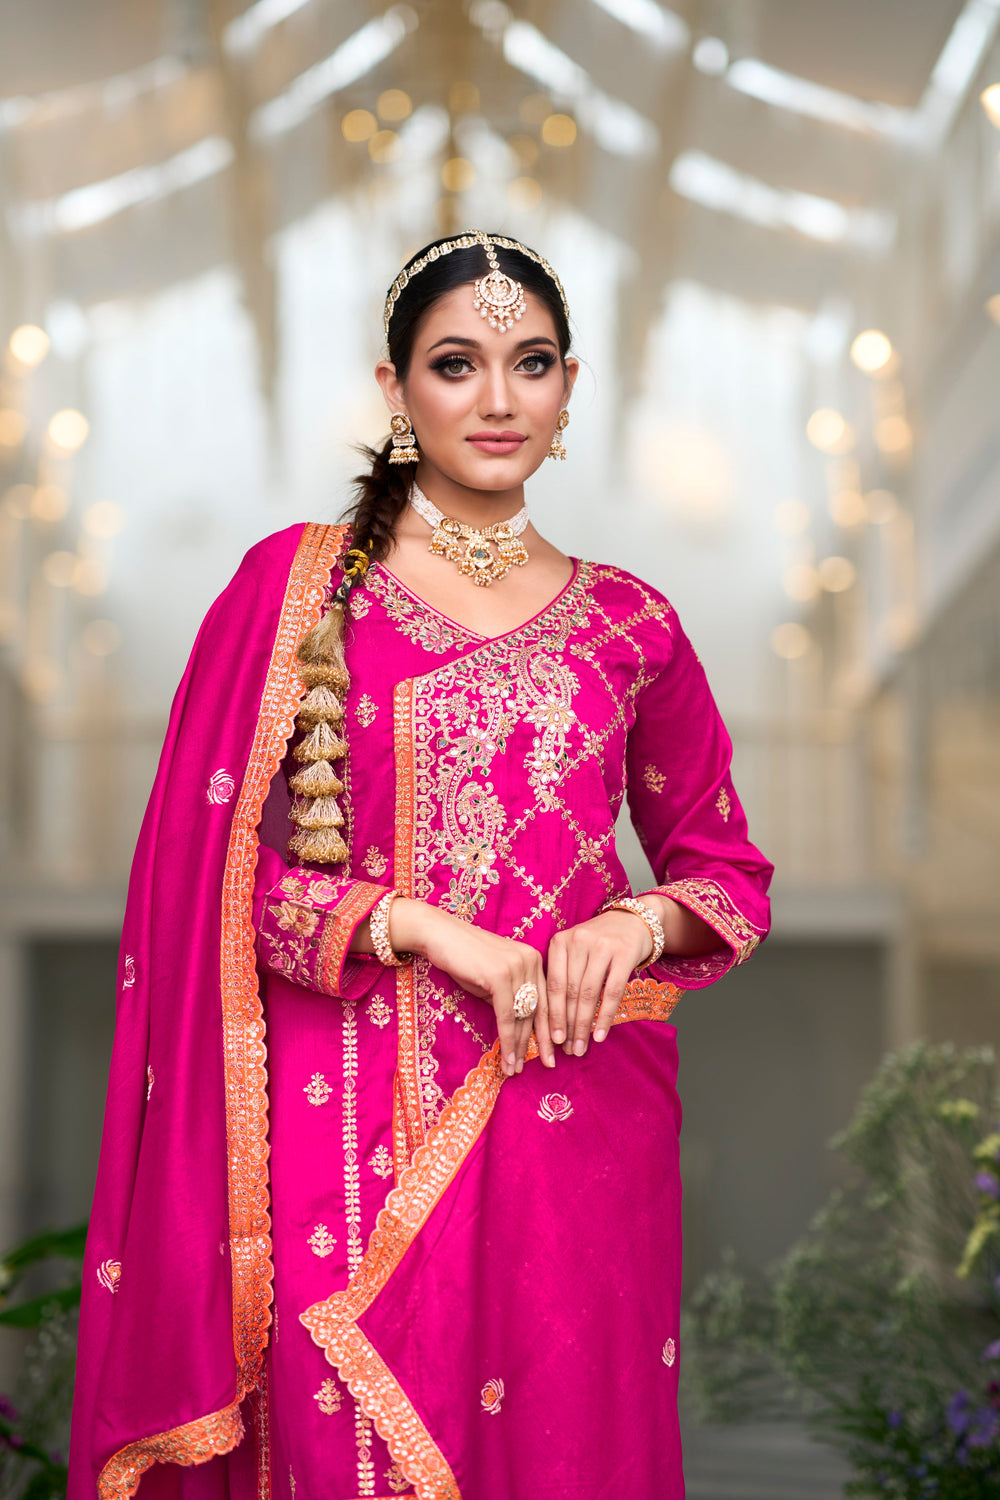 Elegant Pink Silk Salwar Suit with Heavy Embroidery for Wedding & Party Glamour